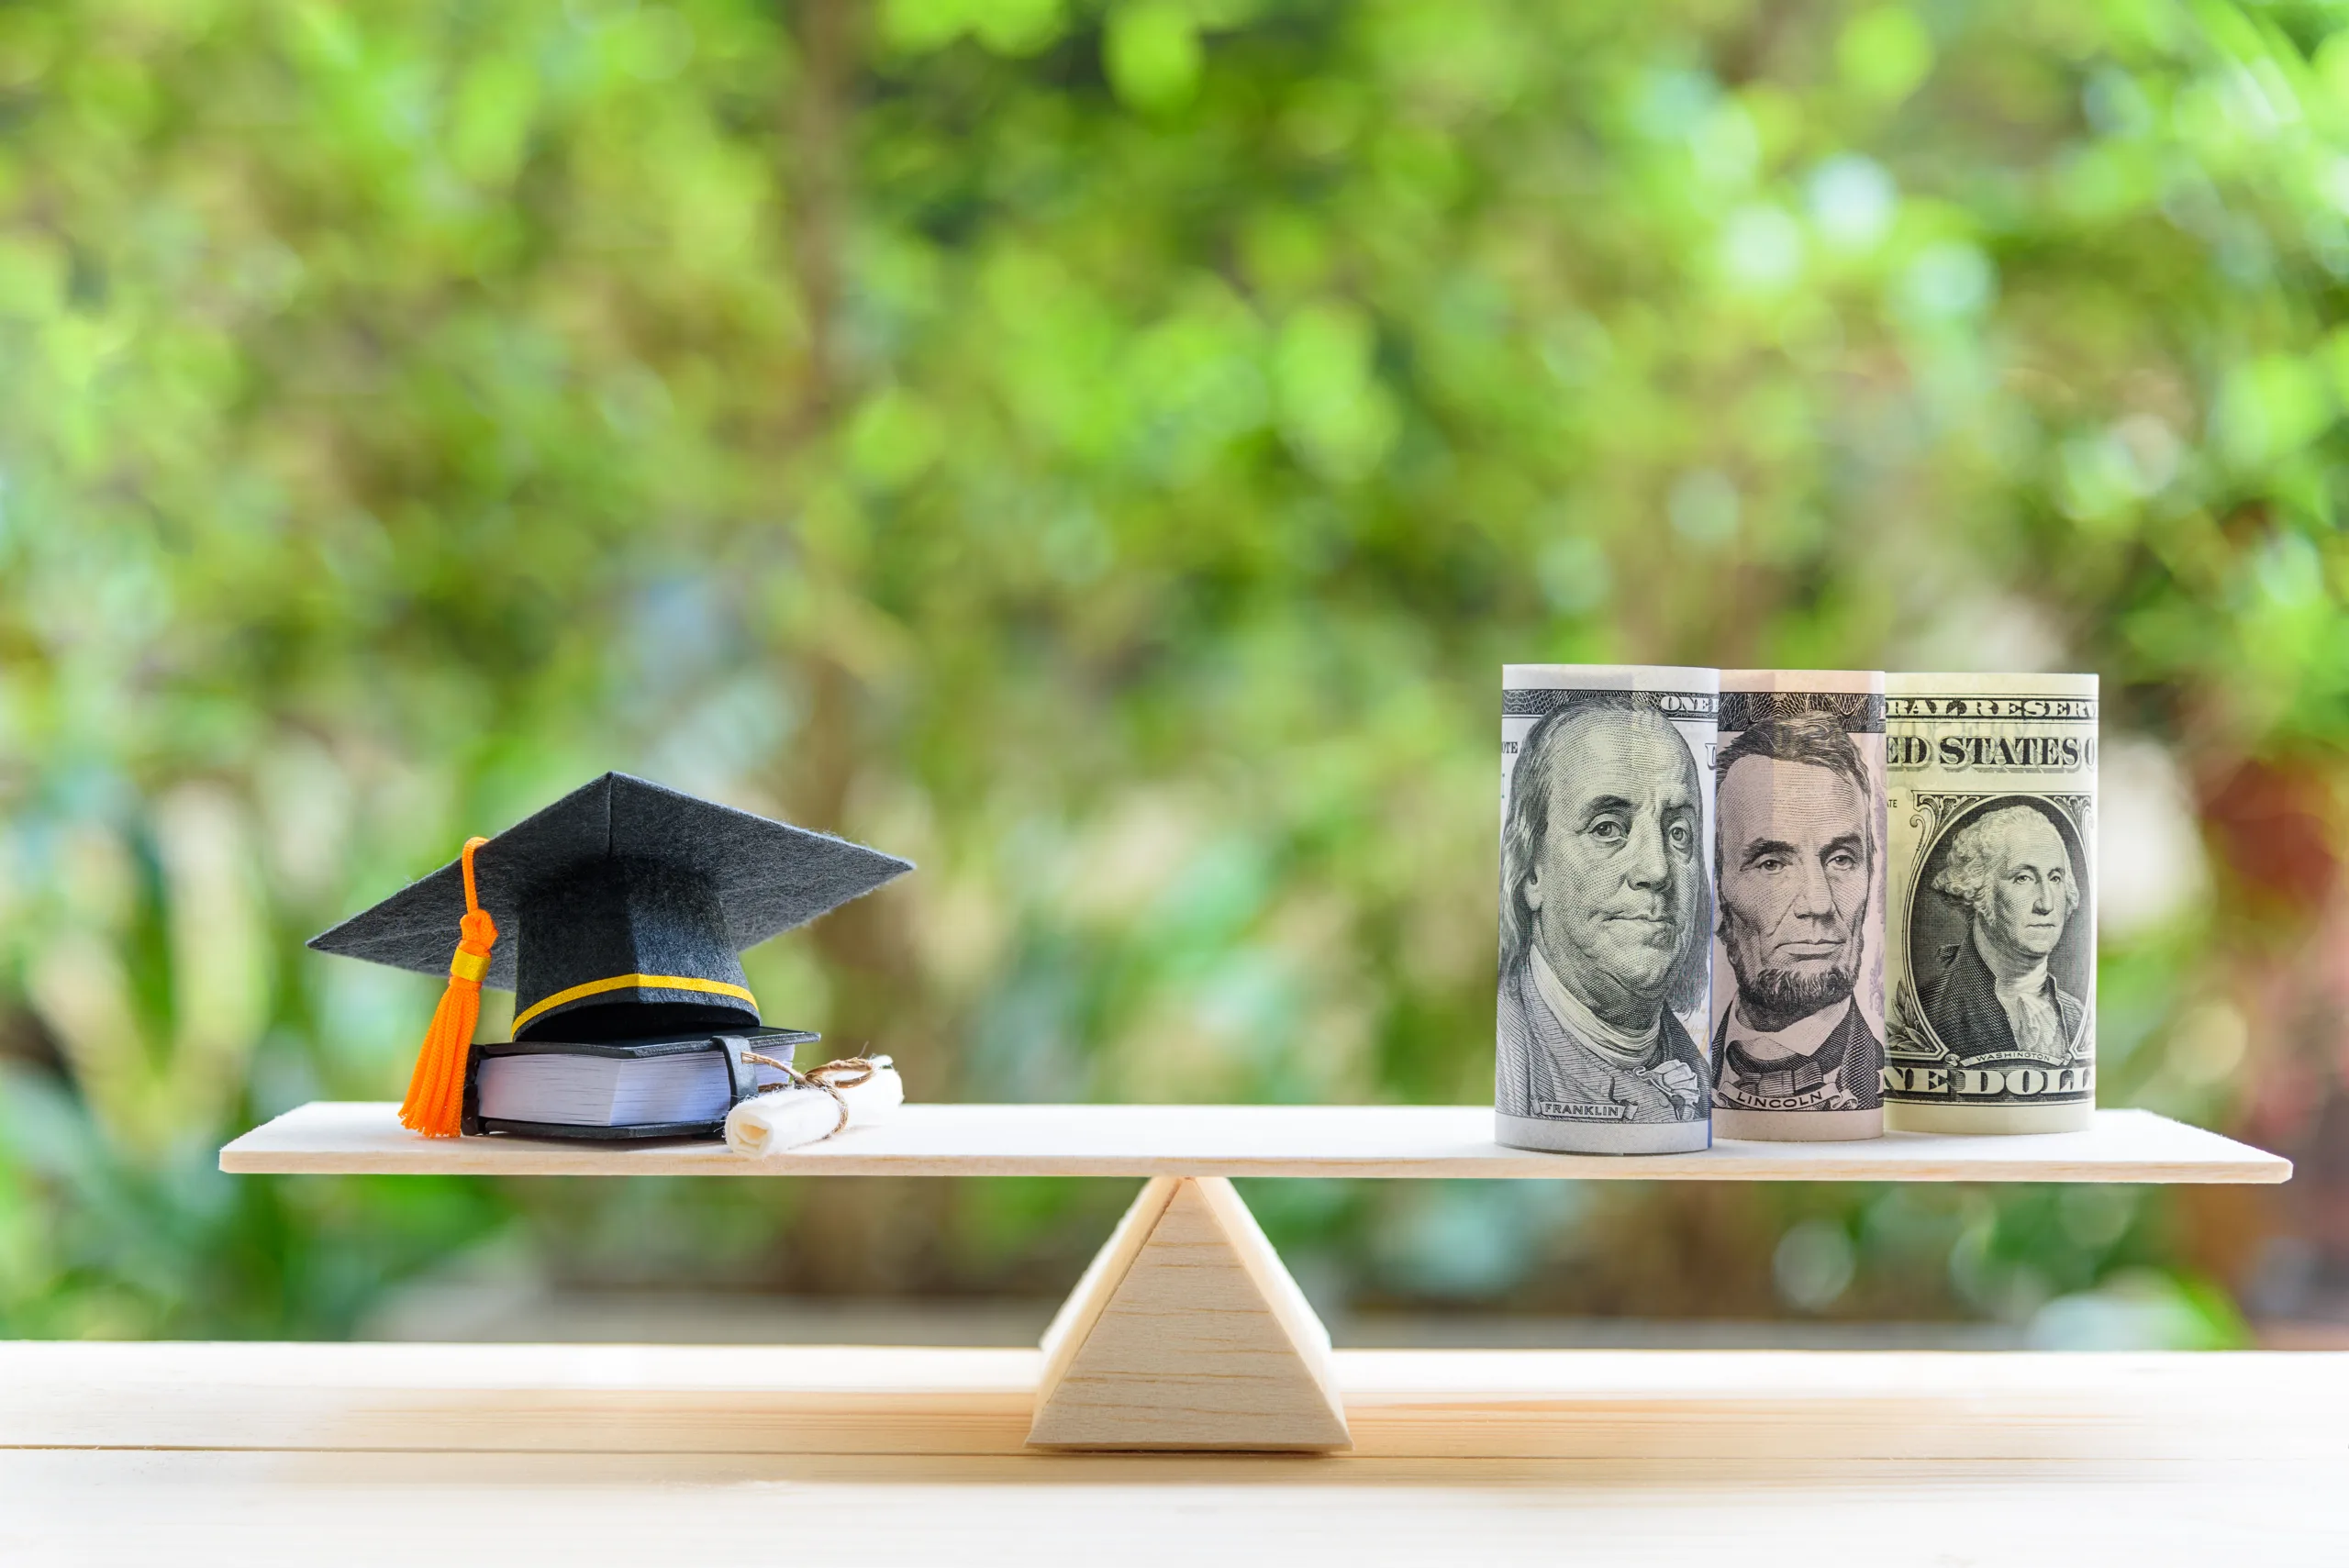 Money cost saving for goal and success in school, education concept : US USD dollar notes or cash, graduation cap, a text book, a certificate / diploma on basic wooden balance scale. Green background.